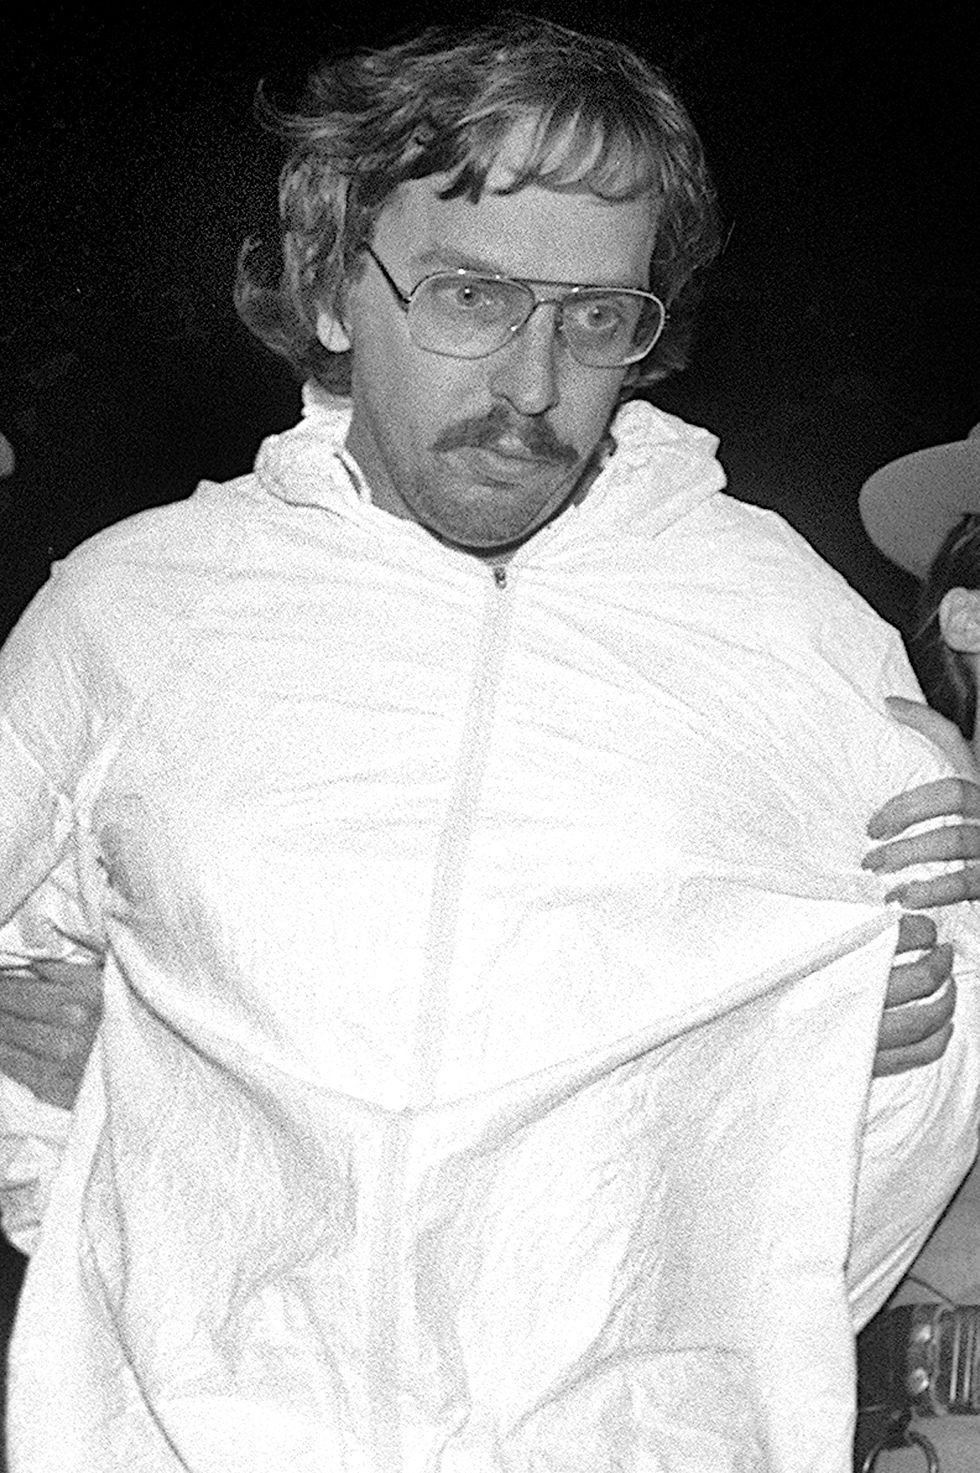 joel rifkin being led by police officers wearing a white jumpsuit